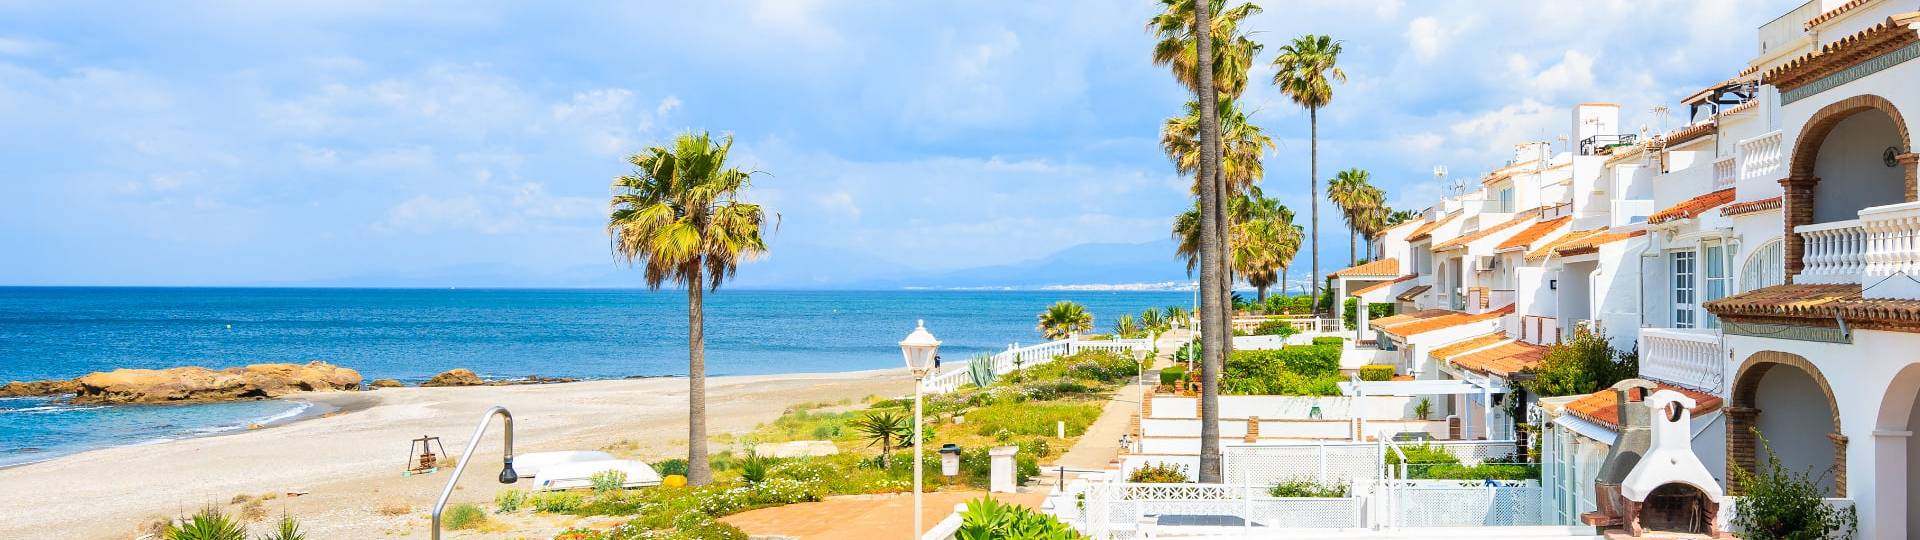 News about Costa Blanca Property Market